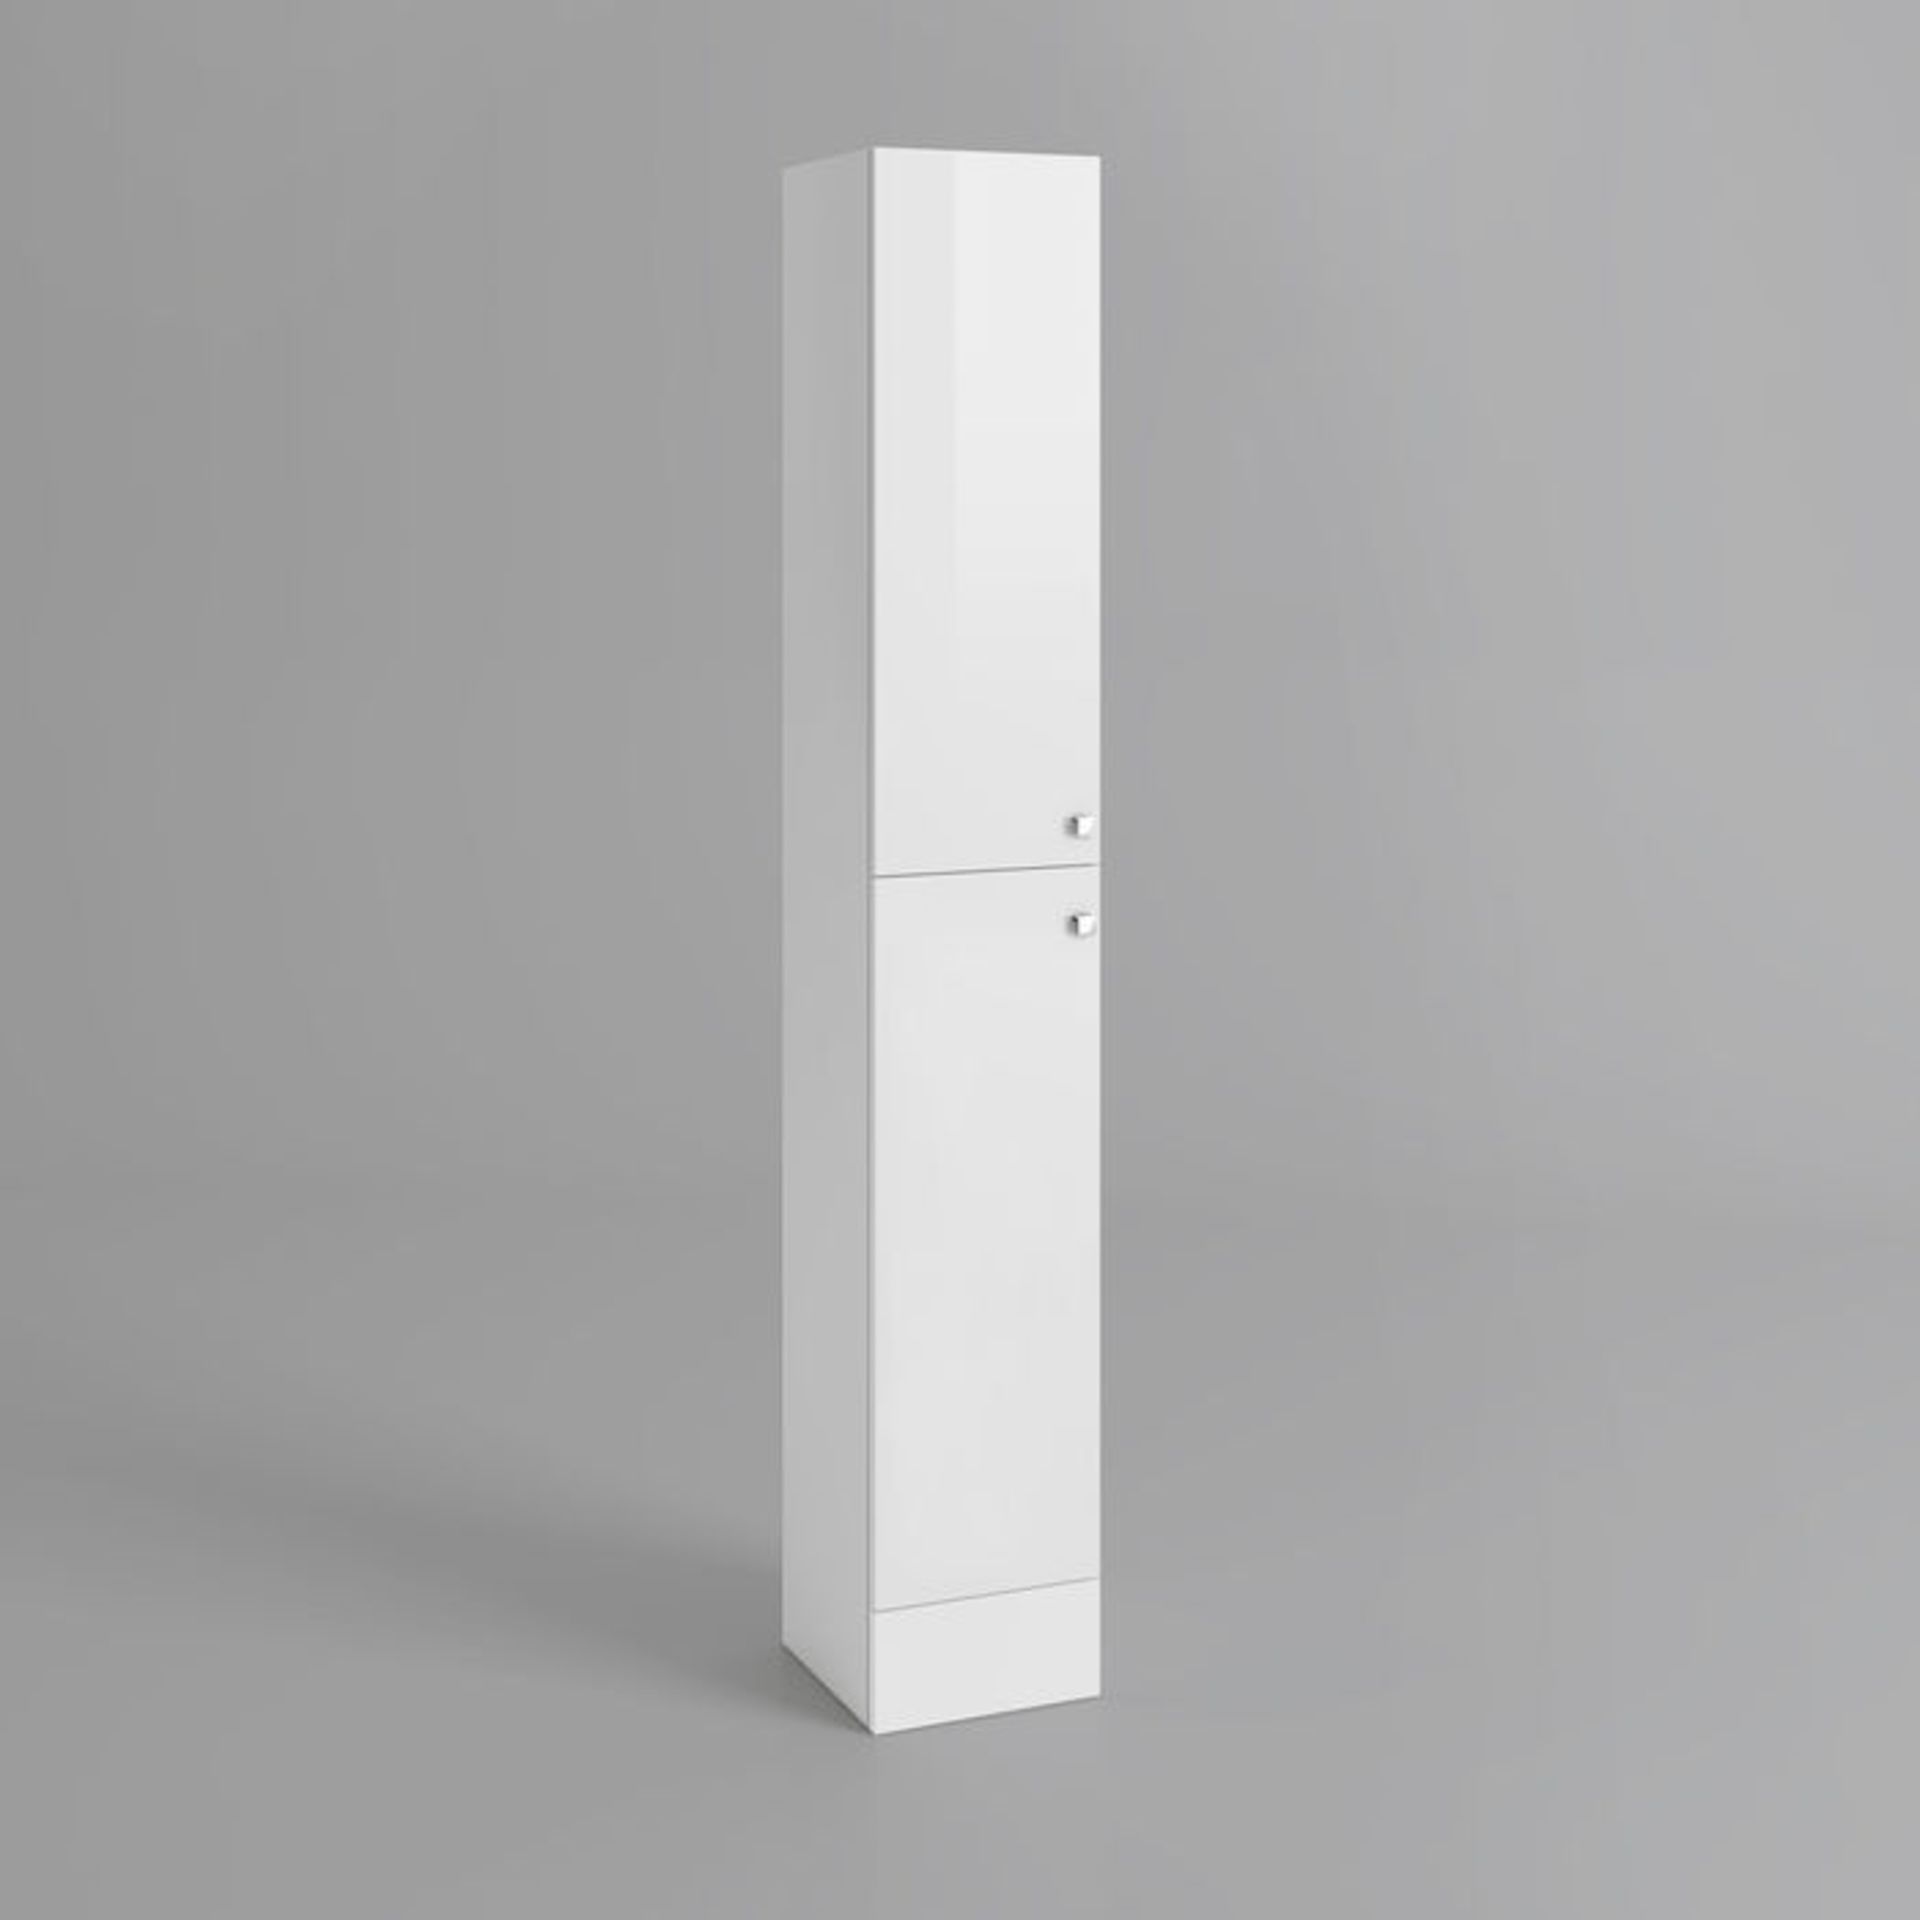 (ZA100) 1900x300mm Harper Gloss White Tall Storage Cabinet - Floor Standing. RRP £179.99. Our tall - Image 4 of 5